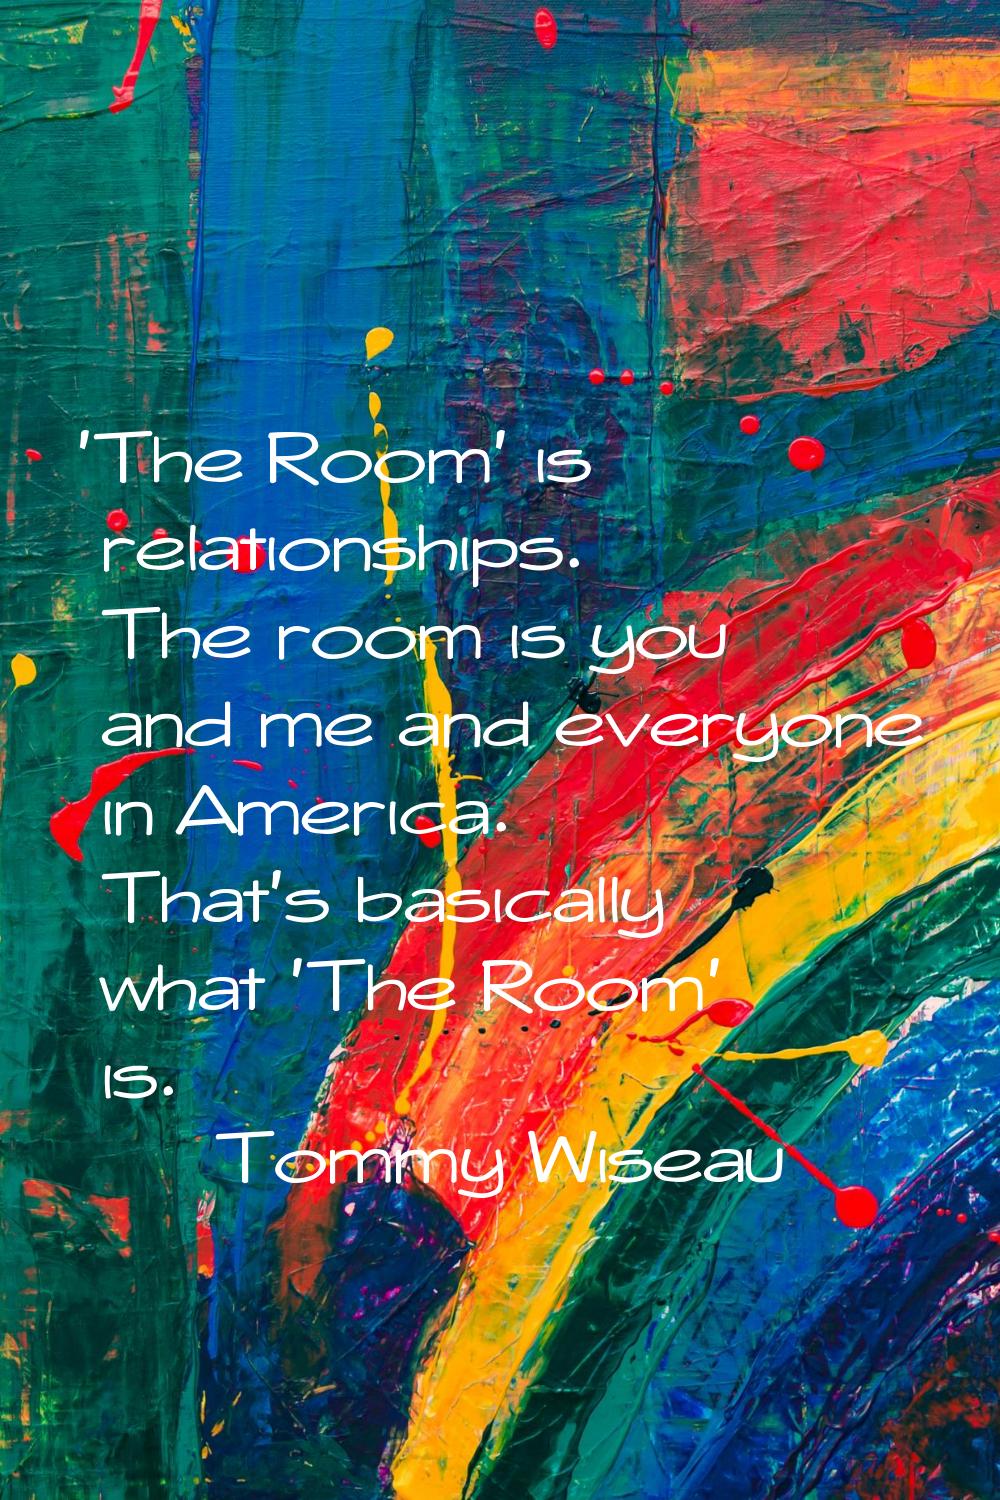 'The Room' is relationships. The room is you and me and everyone in America. That's basically what 